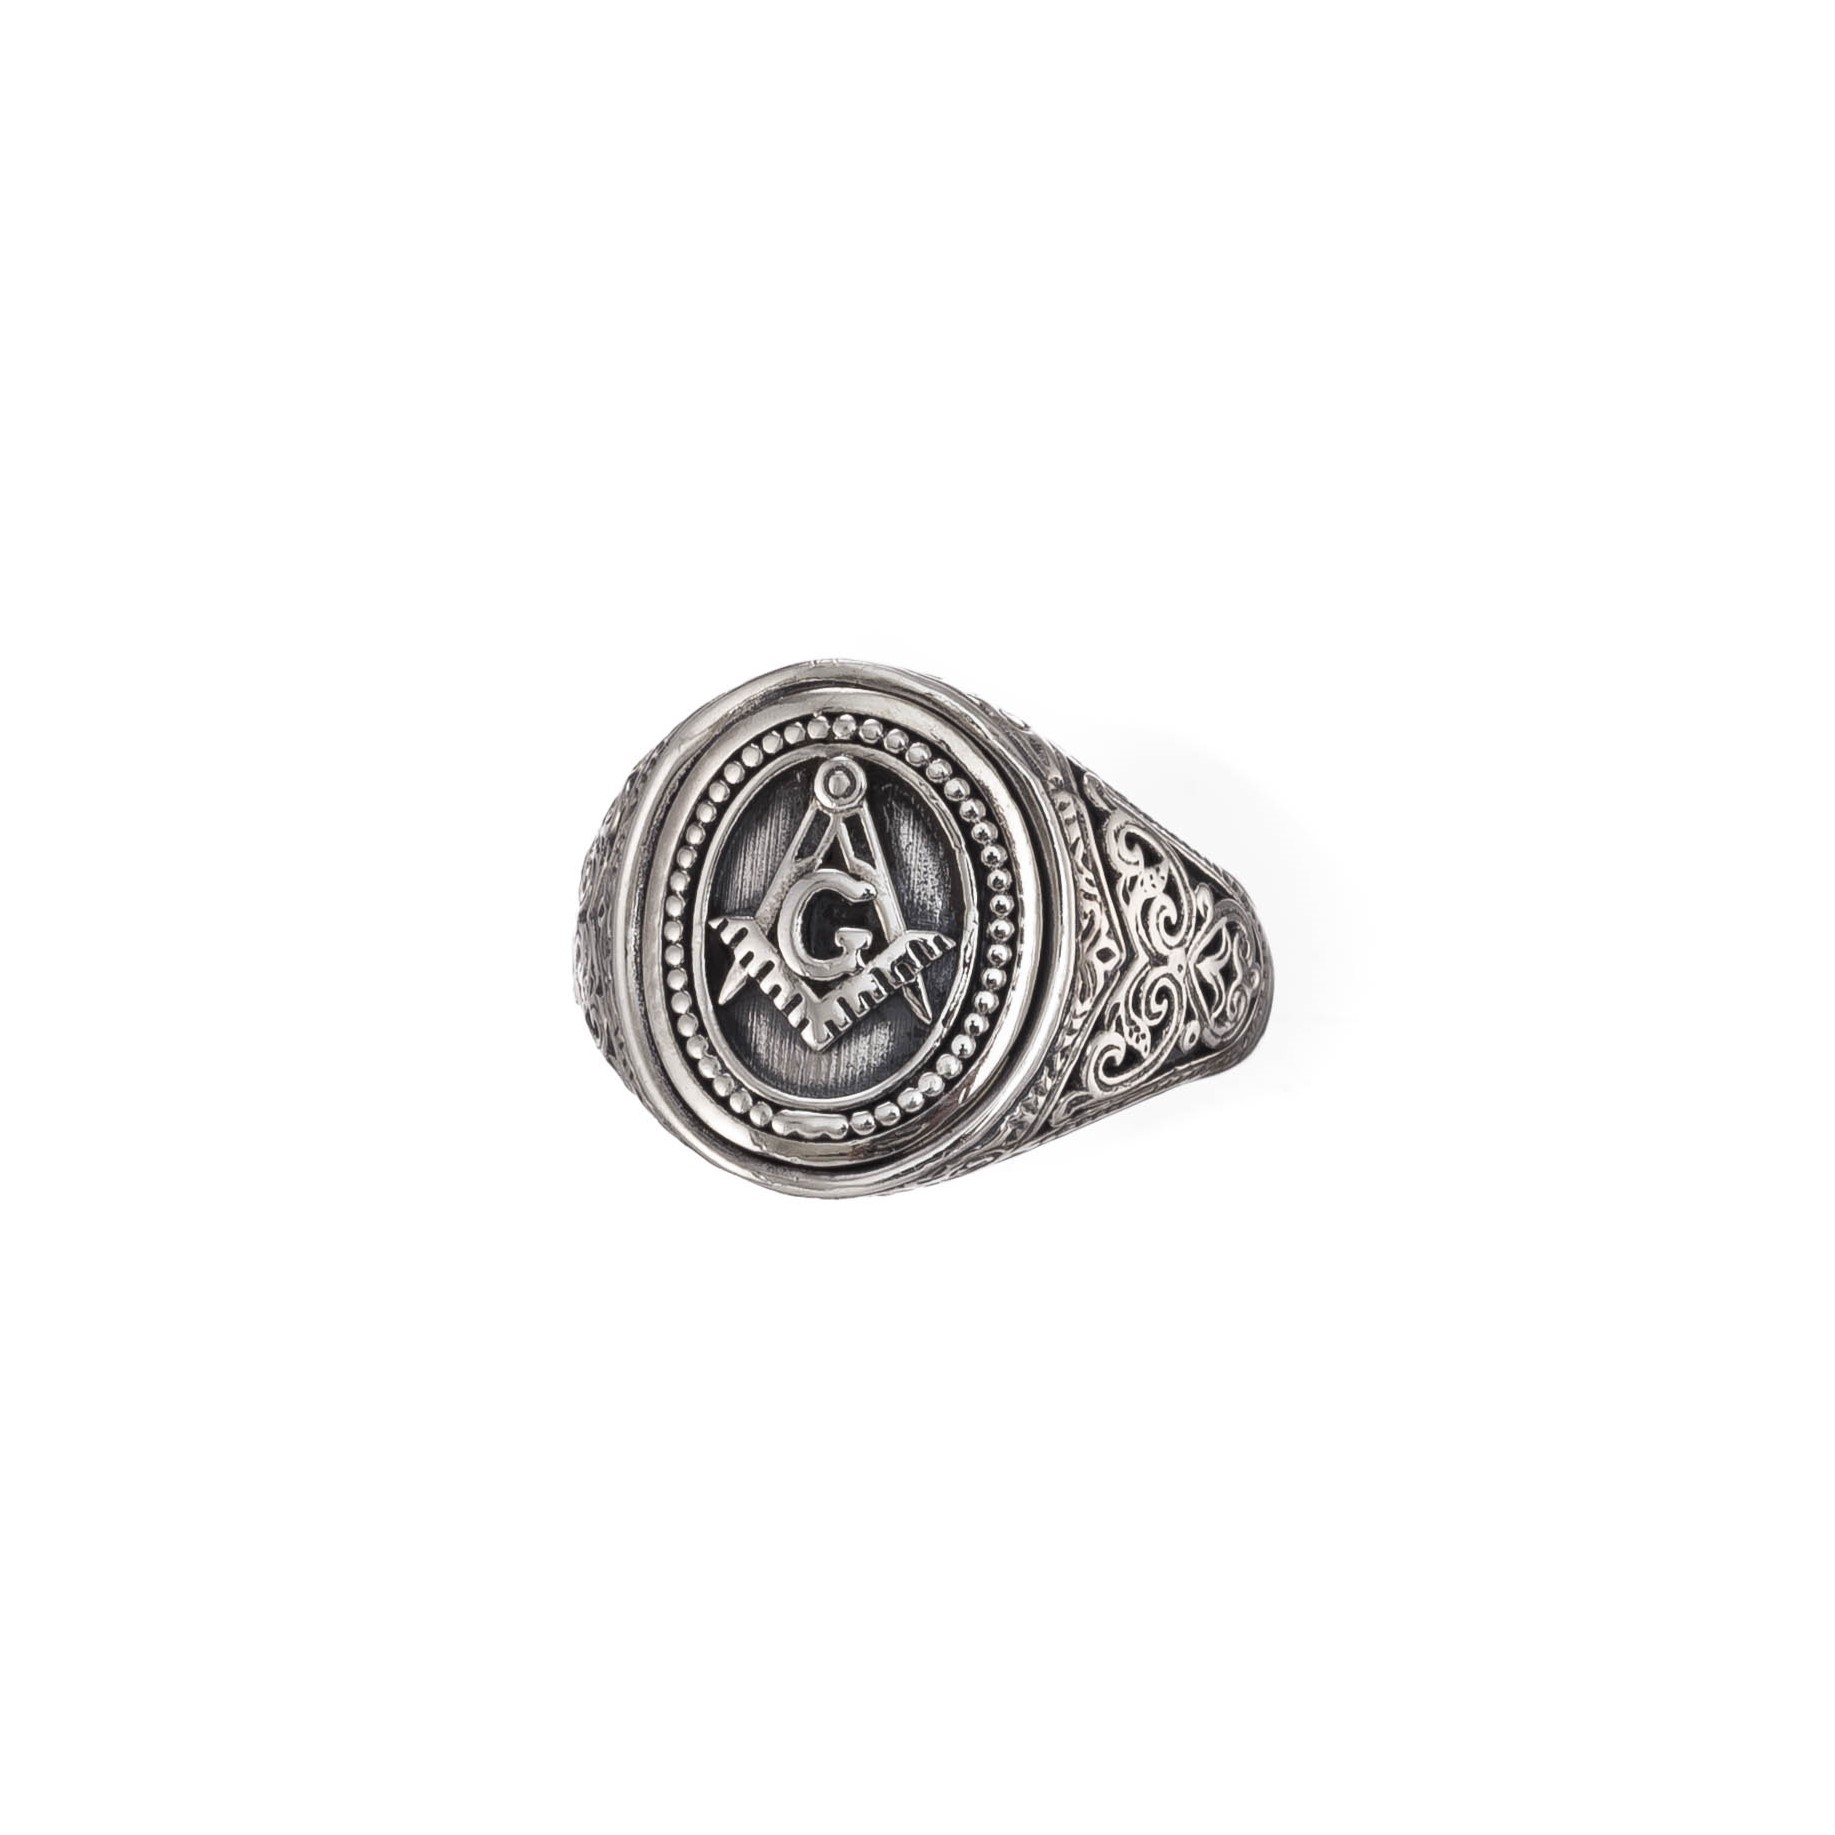 Masonic oval ring in Sterling Silver